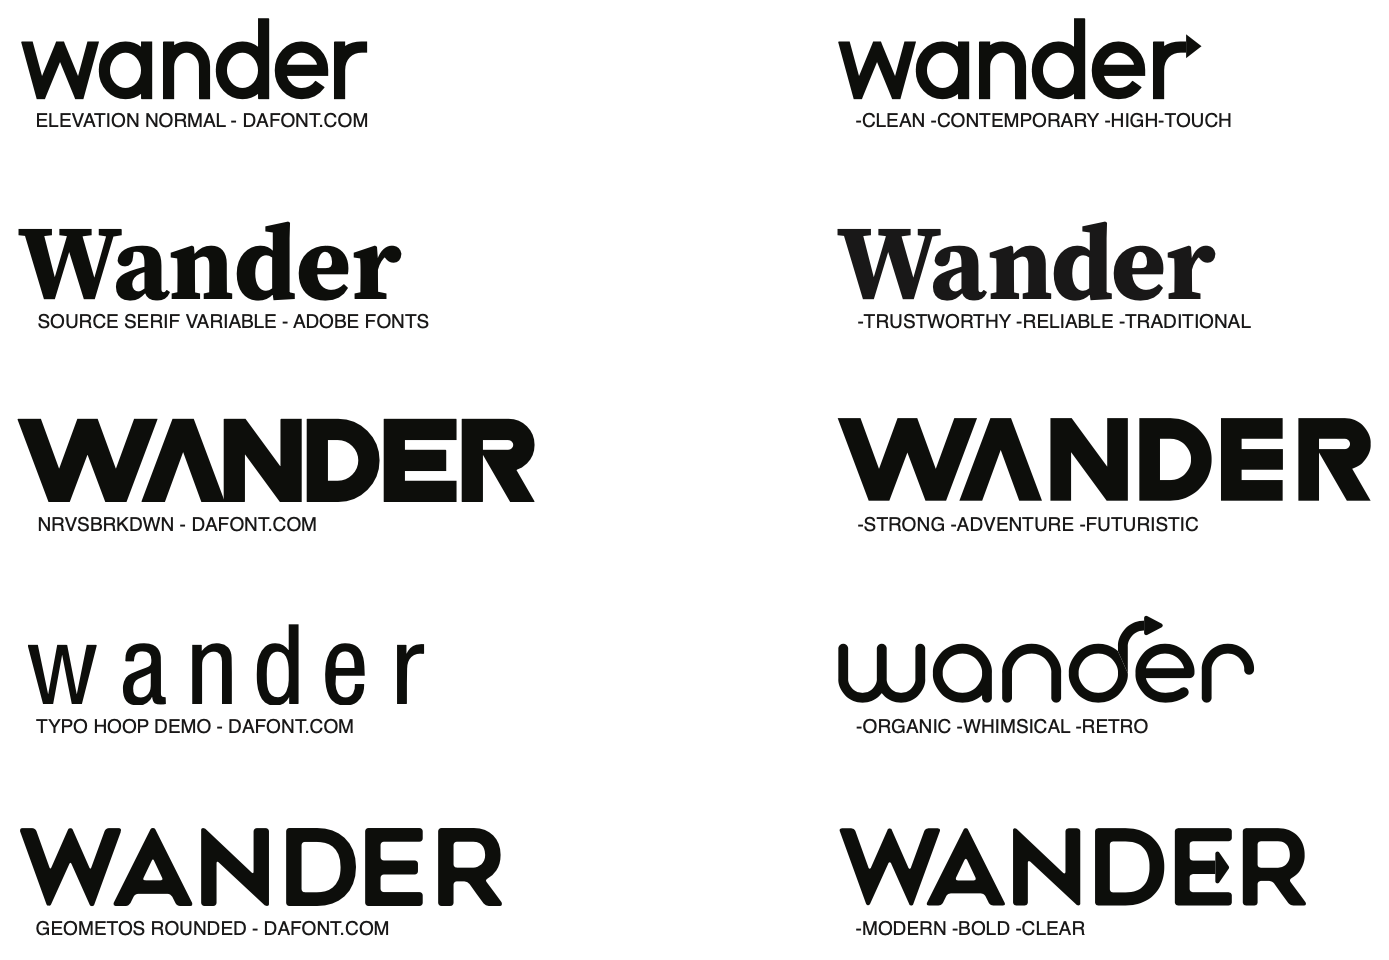 different fonts for wander along with their respective associations